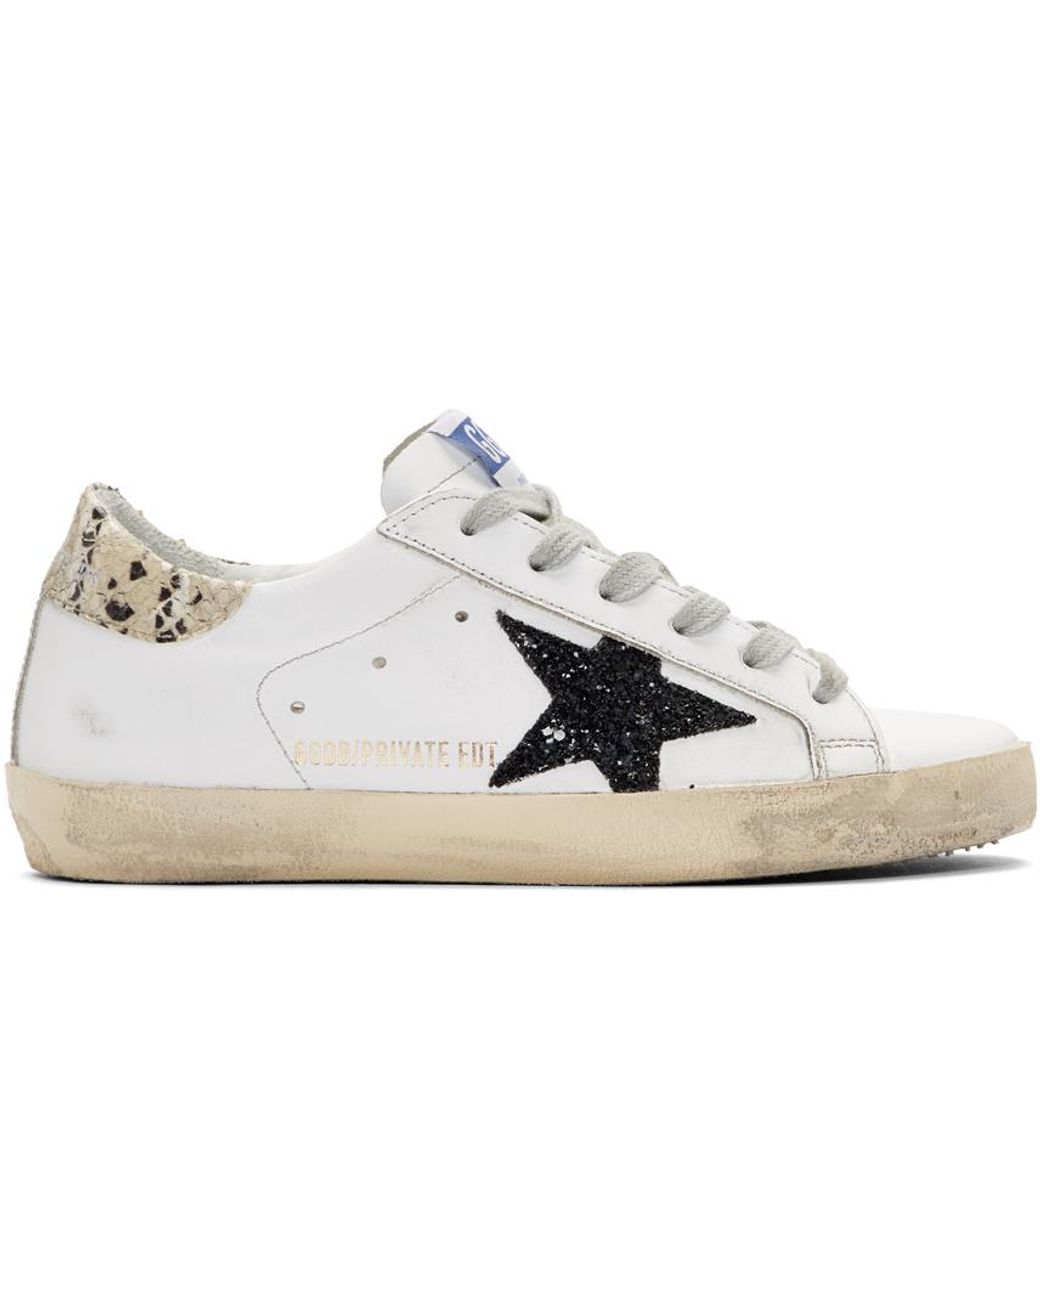 Golden Goose Leather Ssense Exclusive Python Tab Superstar Sneakers in ...